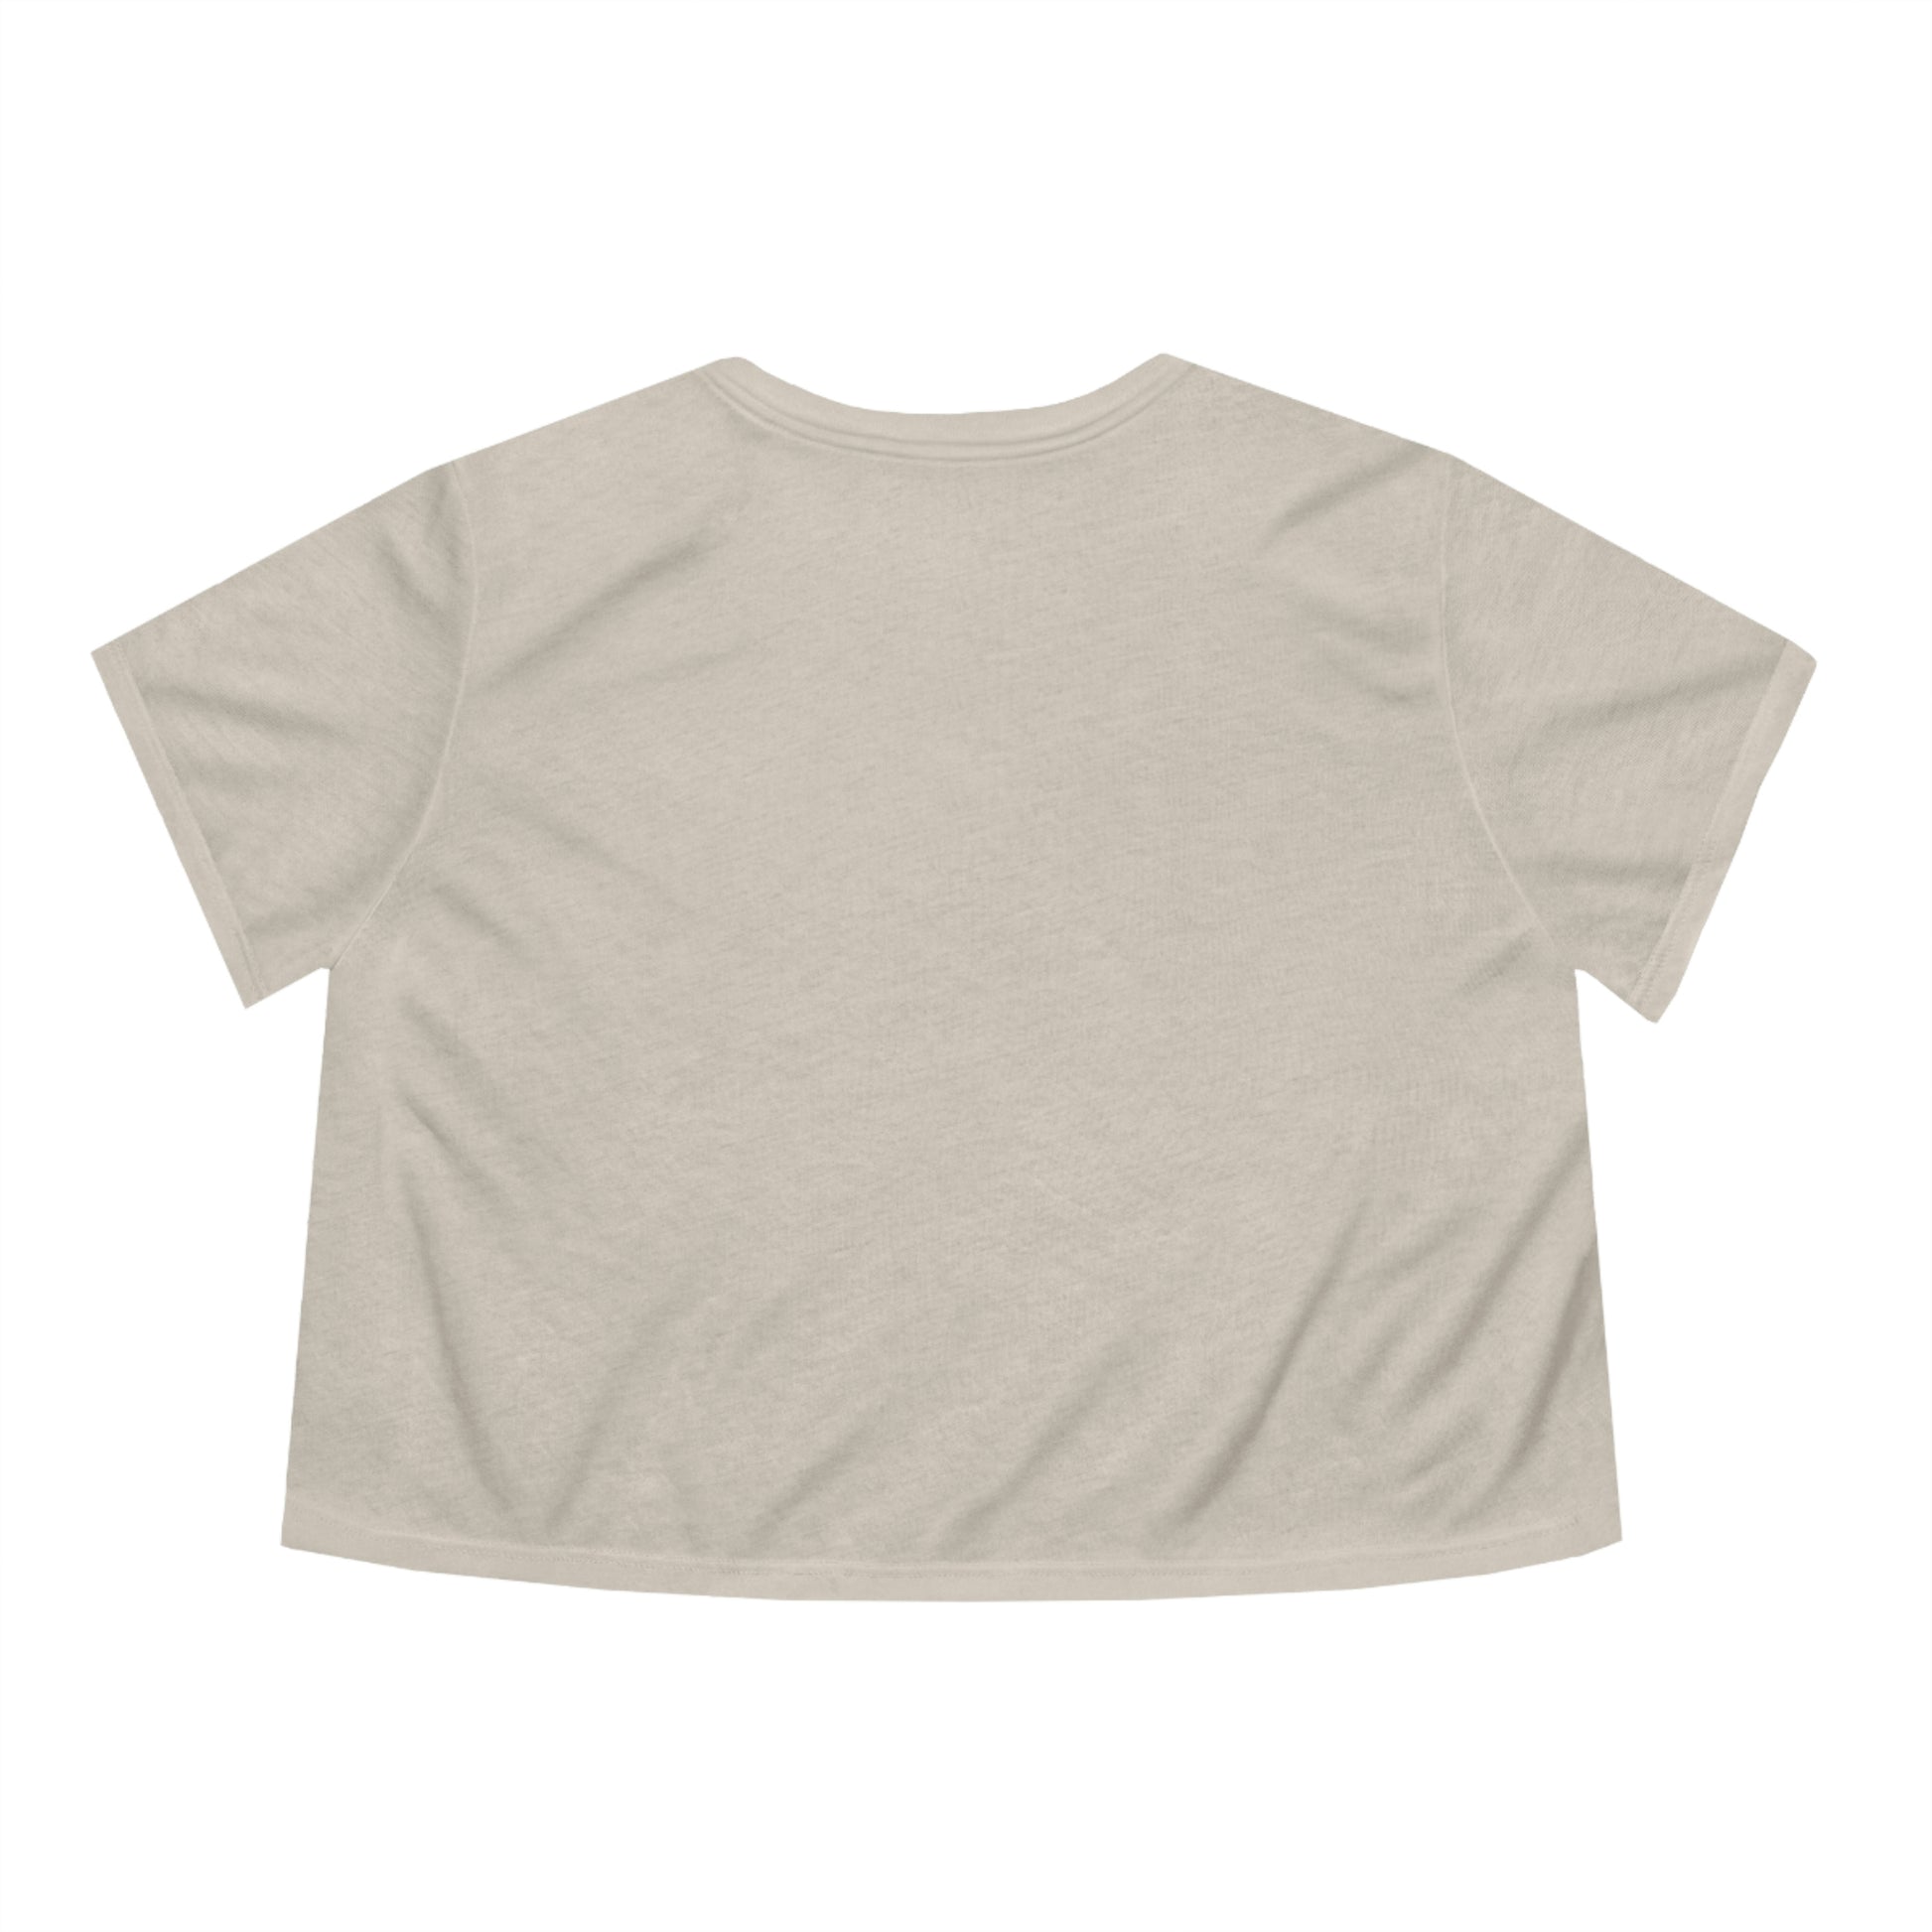 Flat back view of the Heather Dust shirt